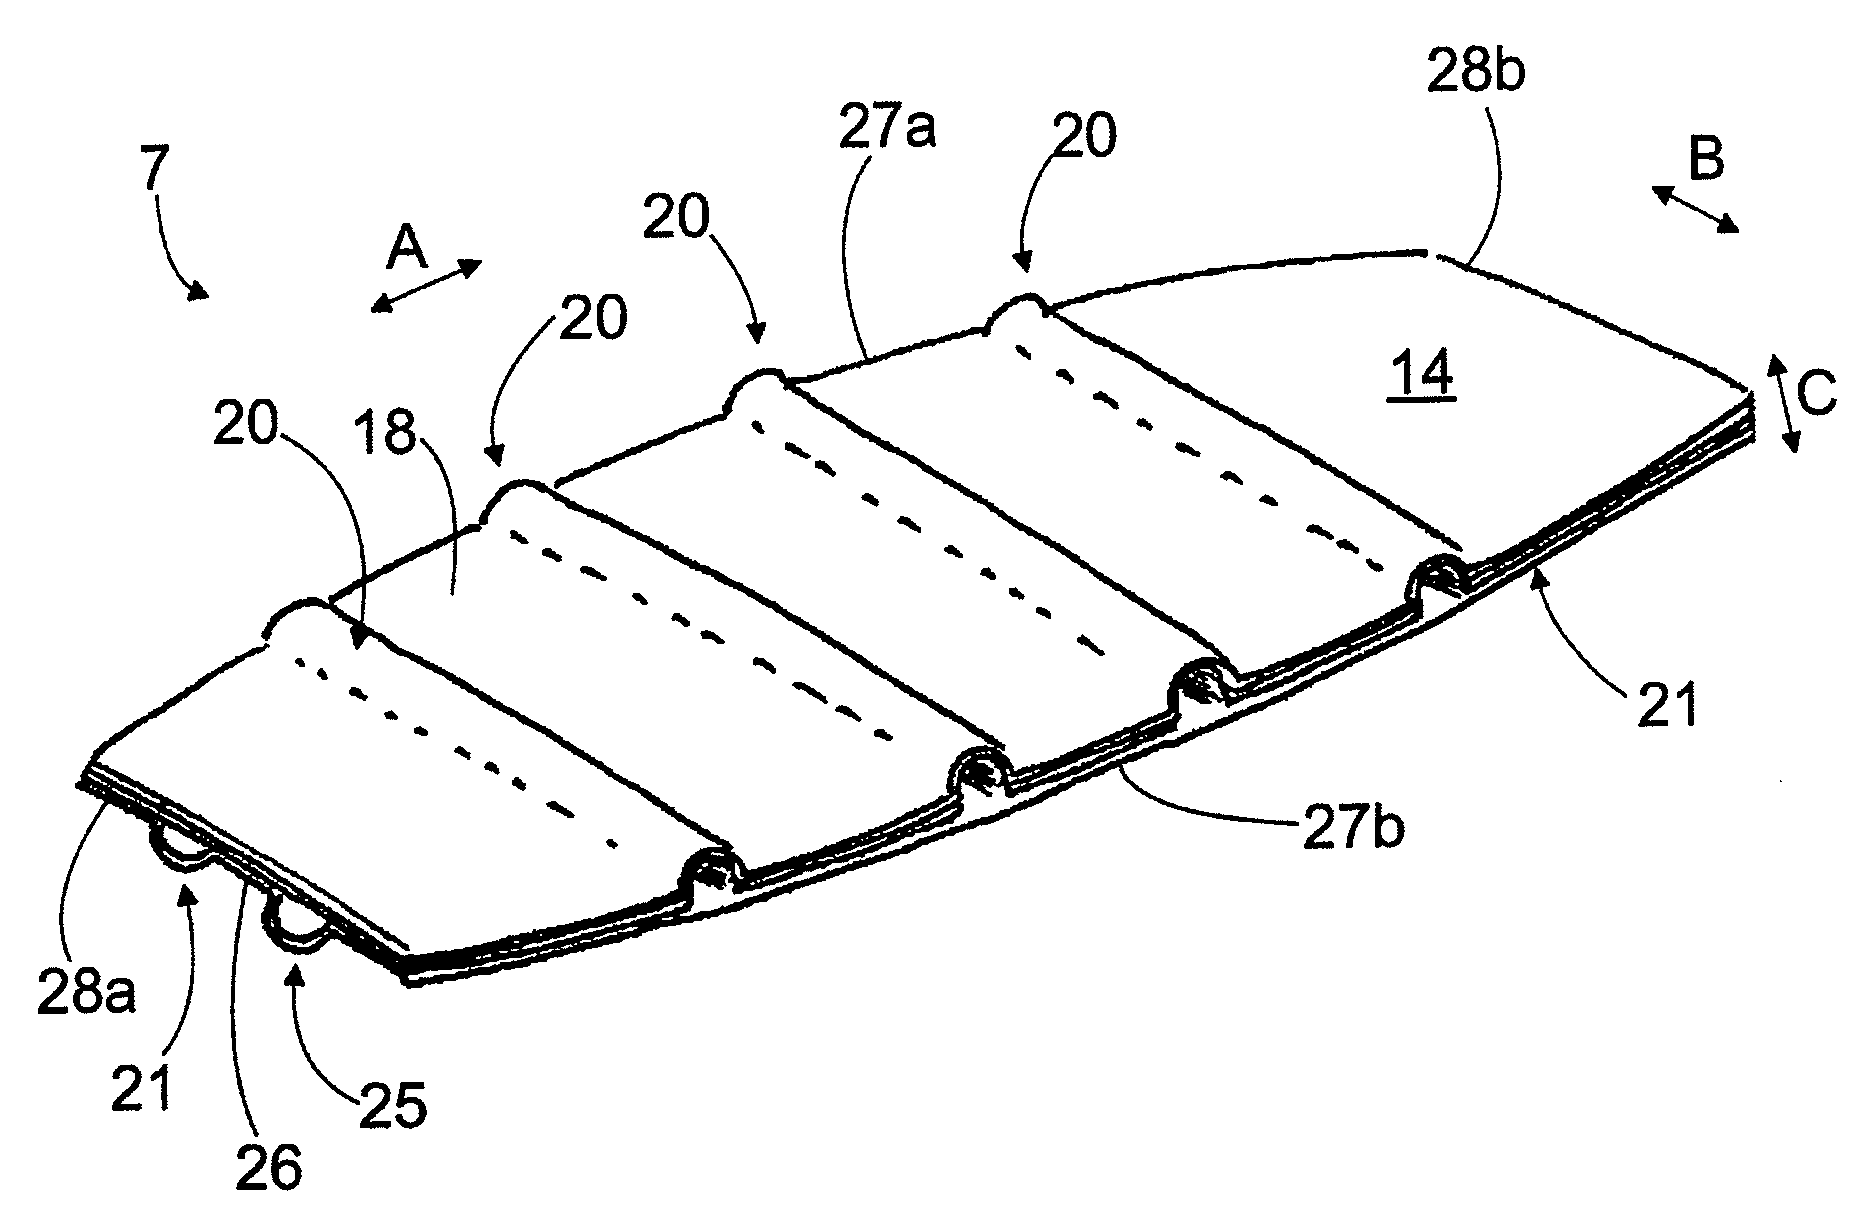 Curved element, wing, control surface and stabilizer for aircraft